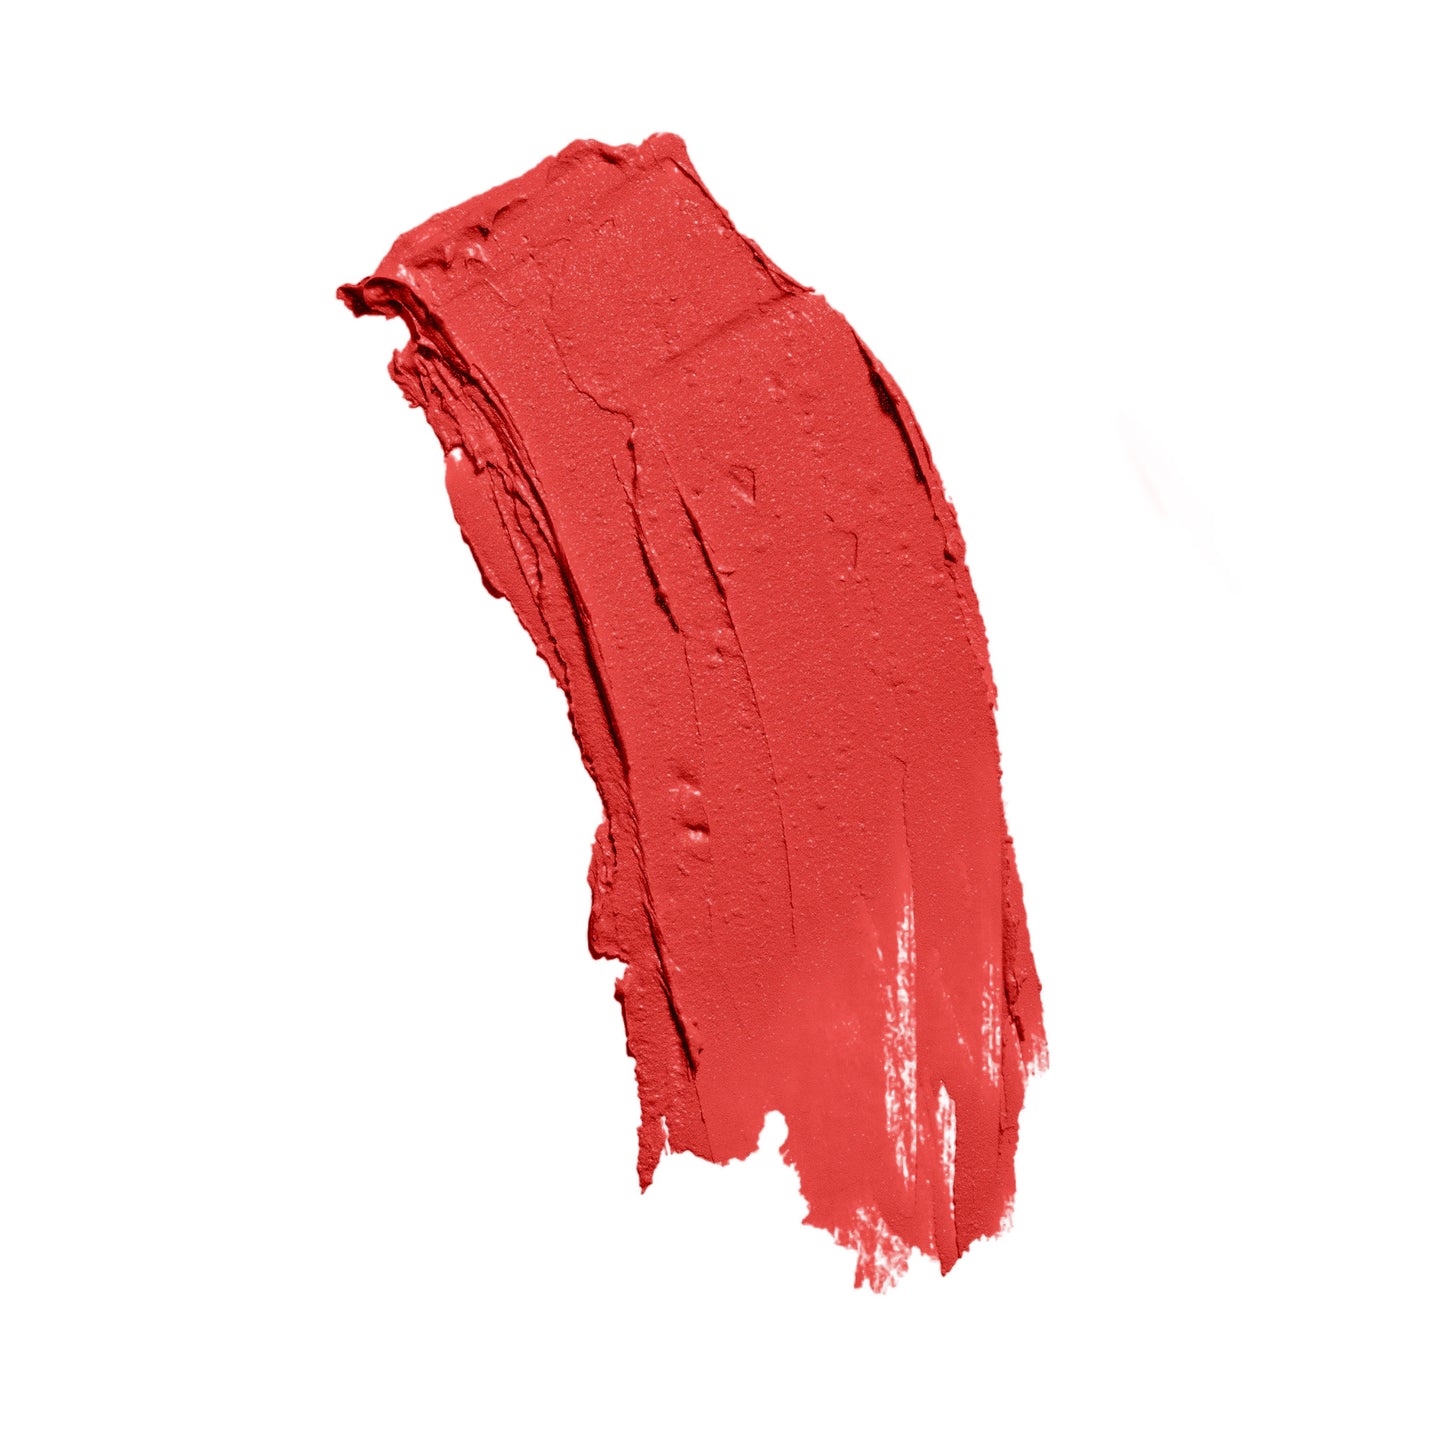 Detailed image of a luscious red satin lipstick on white